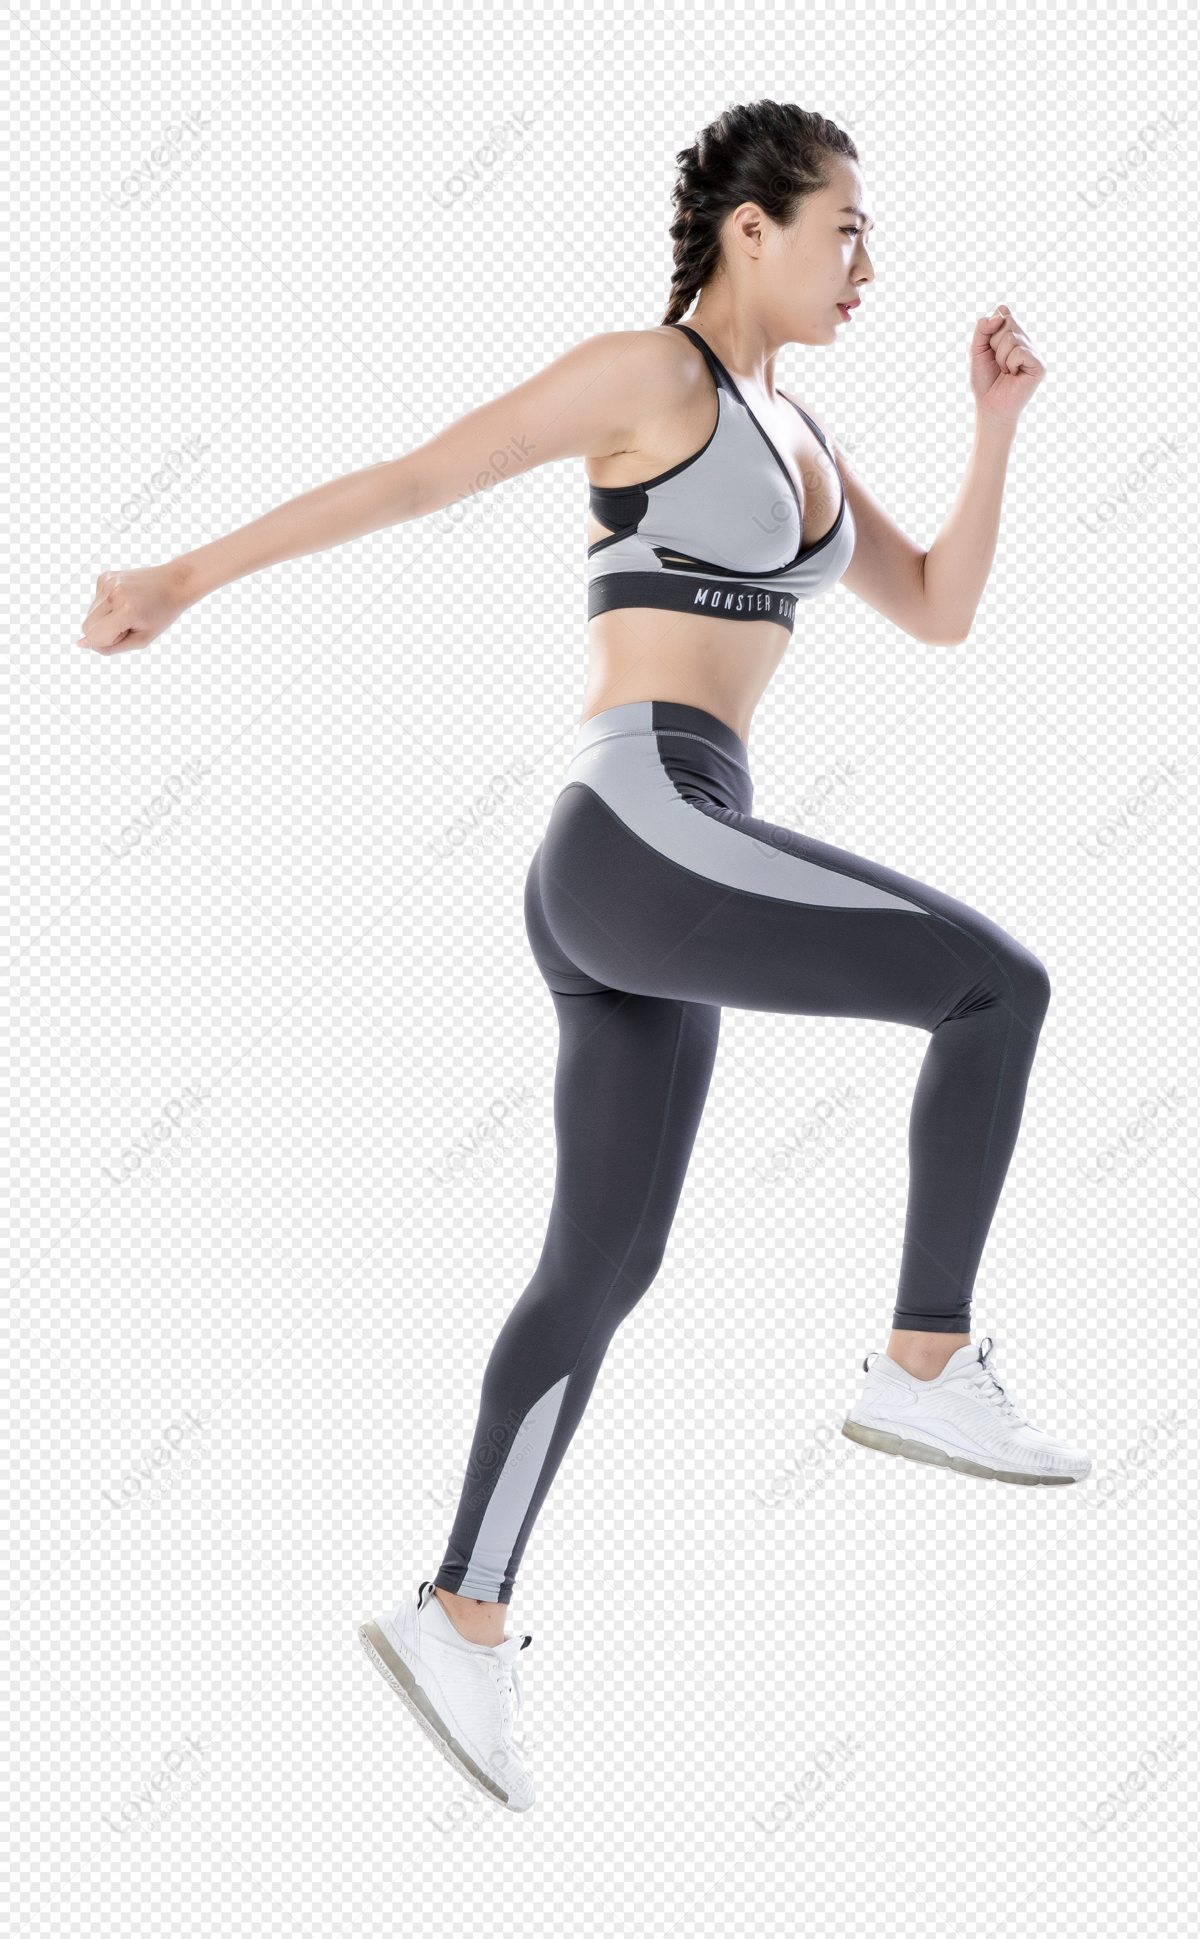 Sports And Fitness Women PNG Transparent Background And Clipart